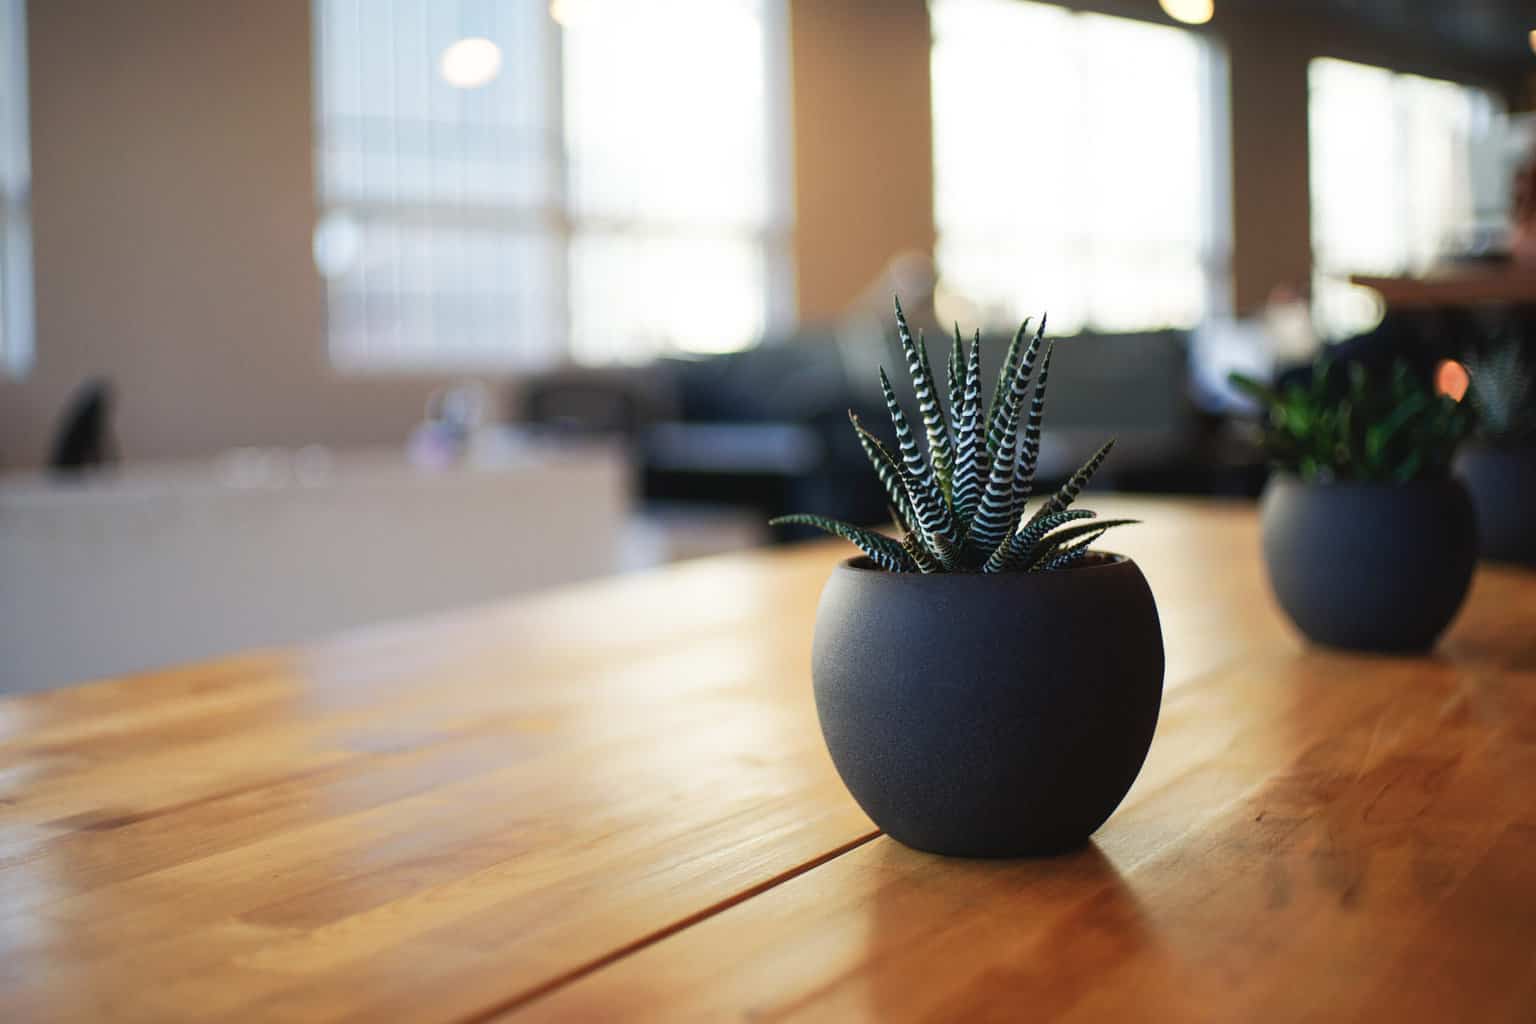 Two potted plants on a wooden table.